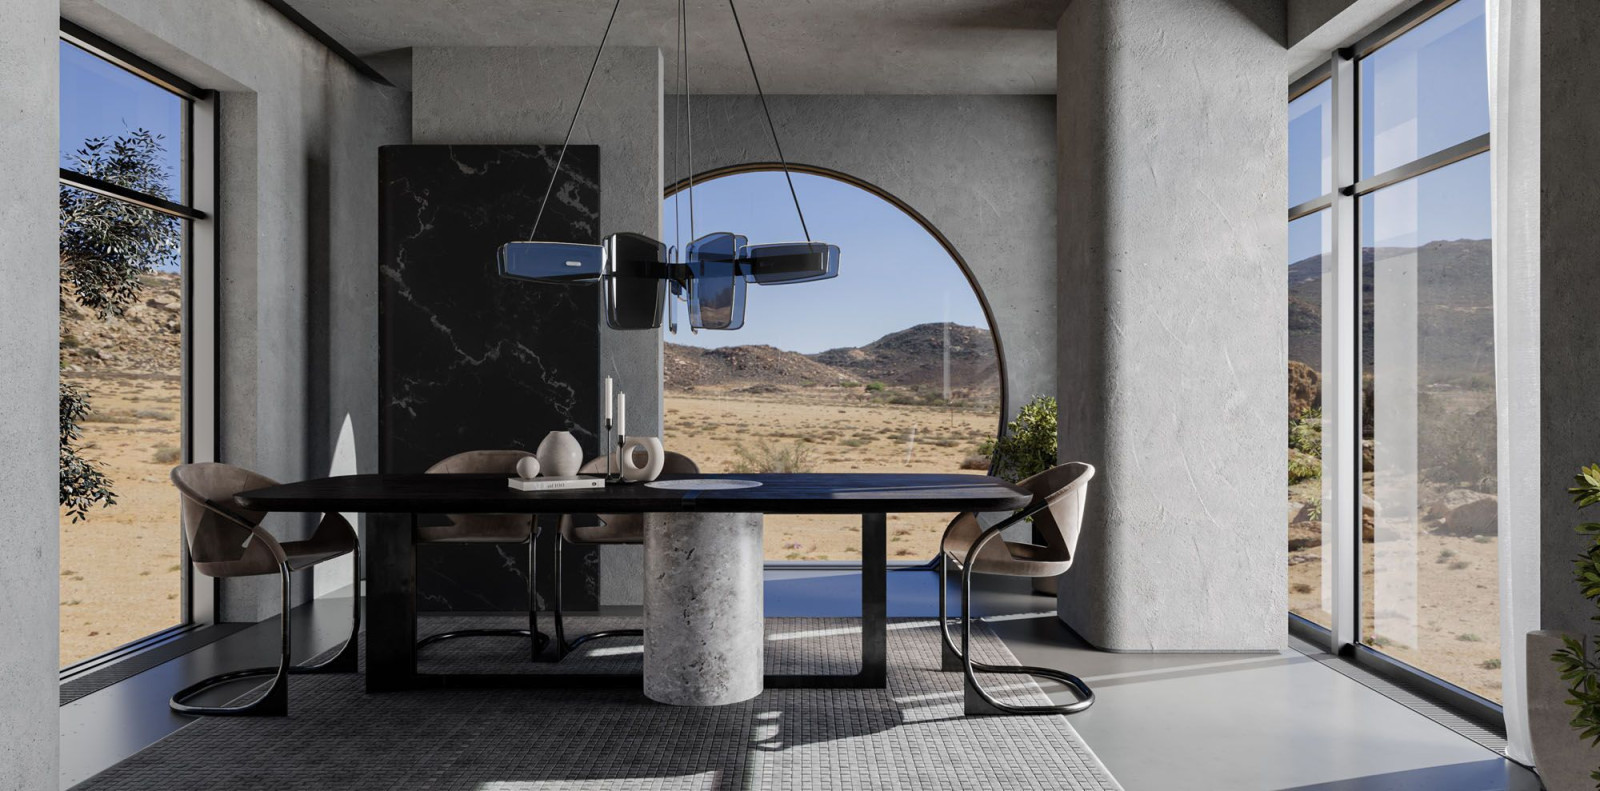 Titano table, in a living room intertwined with the landscape